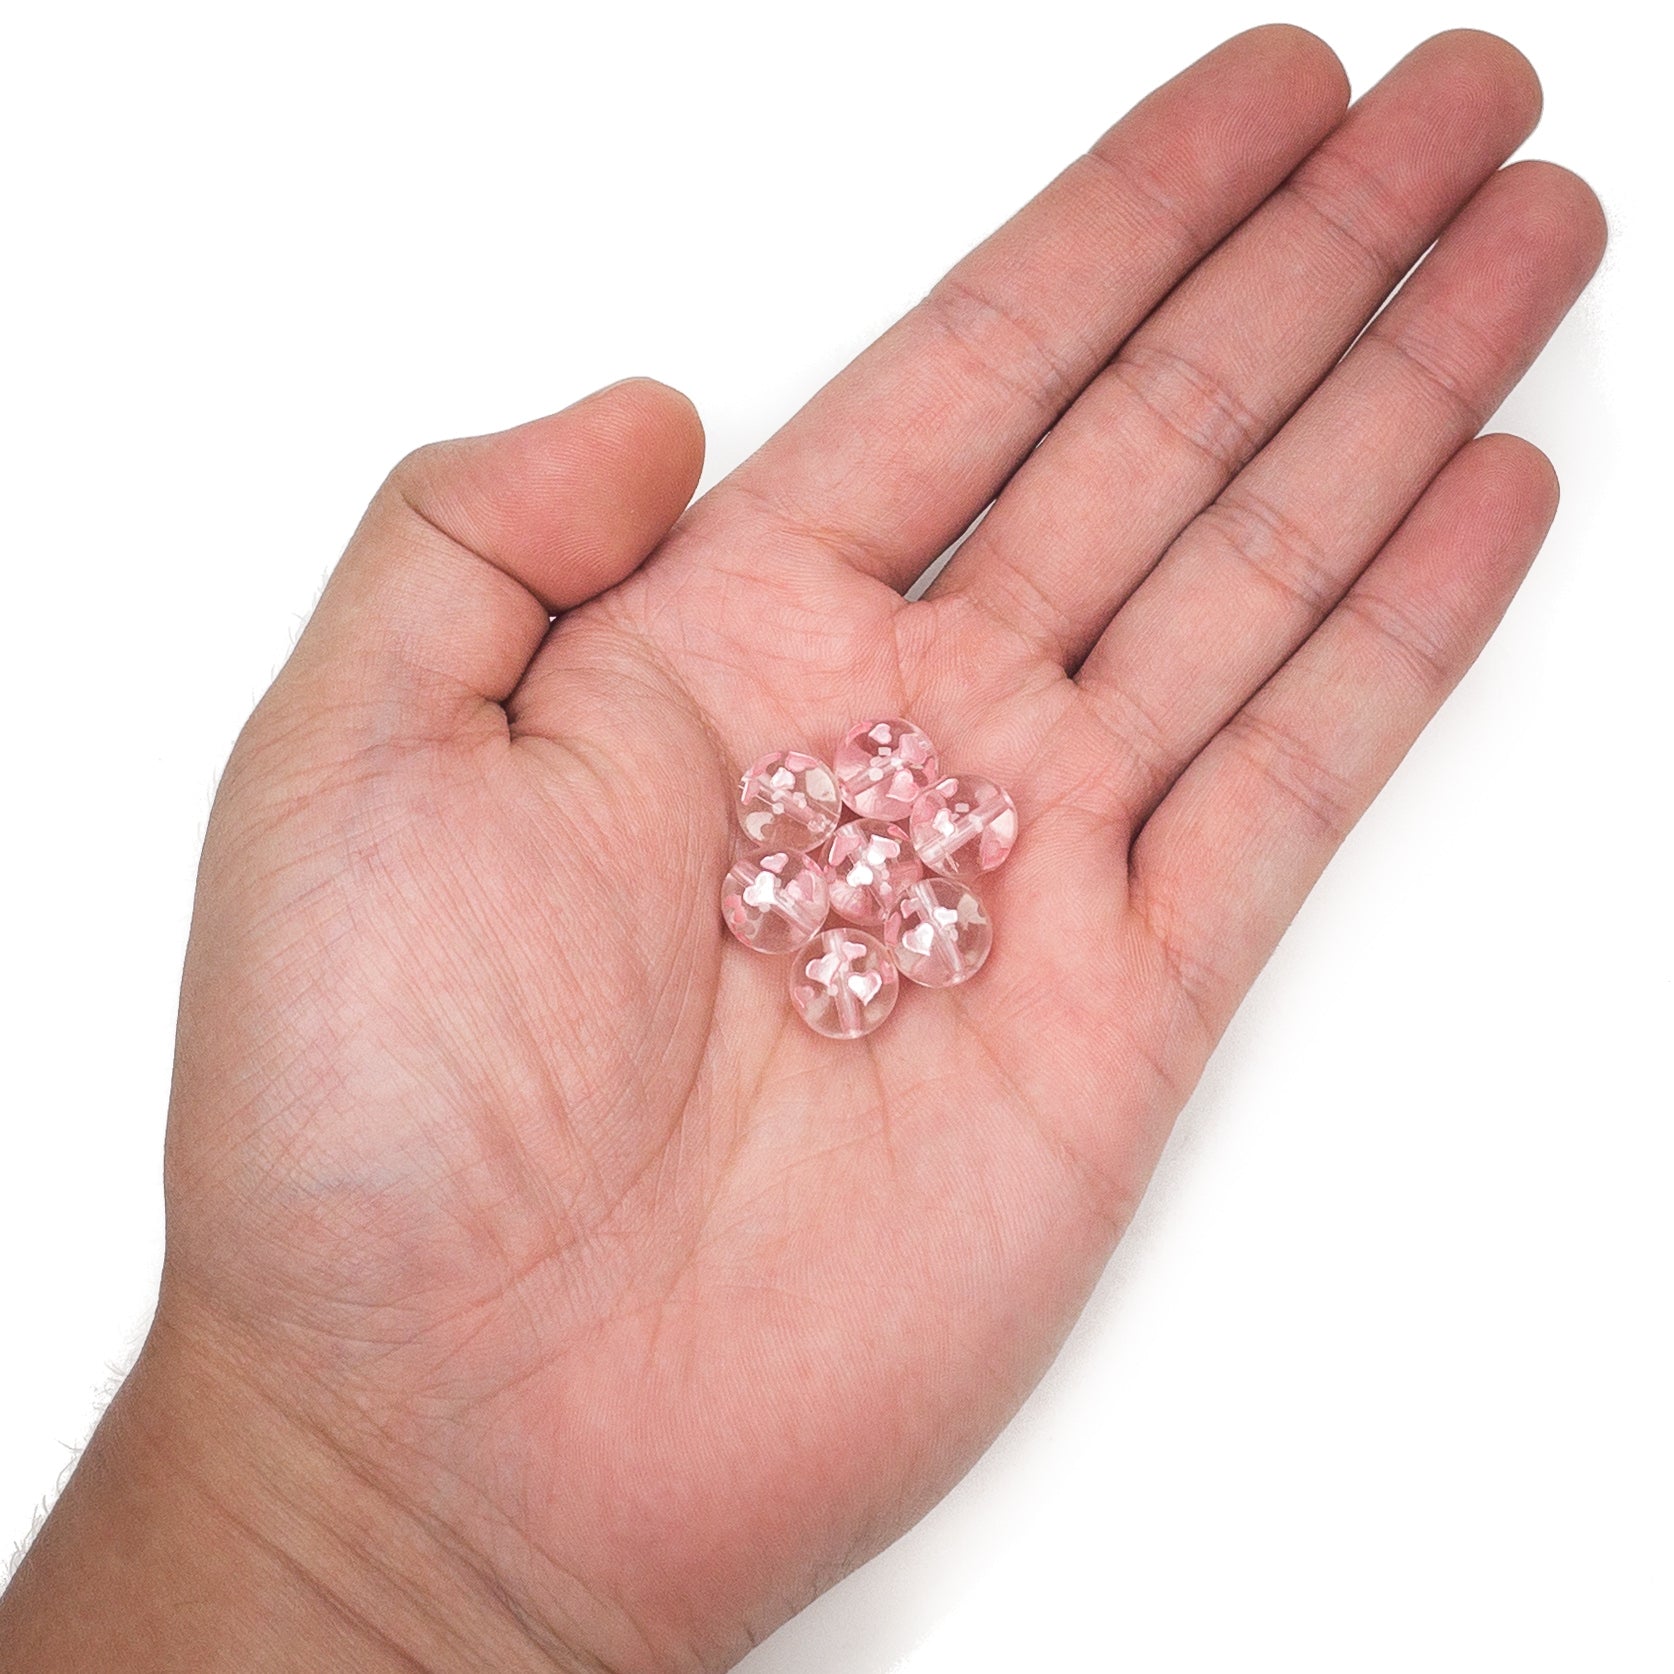 LOVE BUBBLES: Crystal Quartz Etched Pink Hearts 10mm Round Bead - 1 pc.